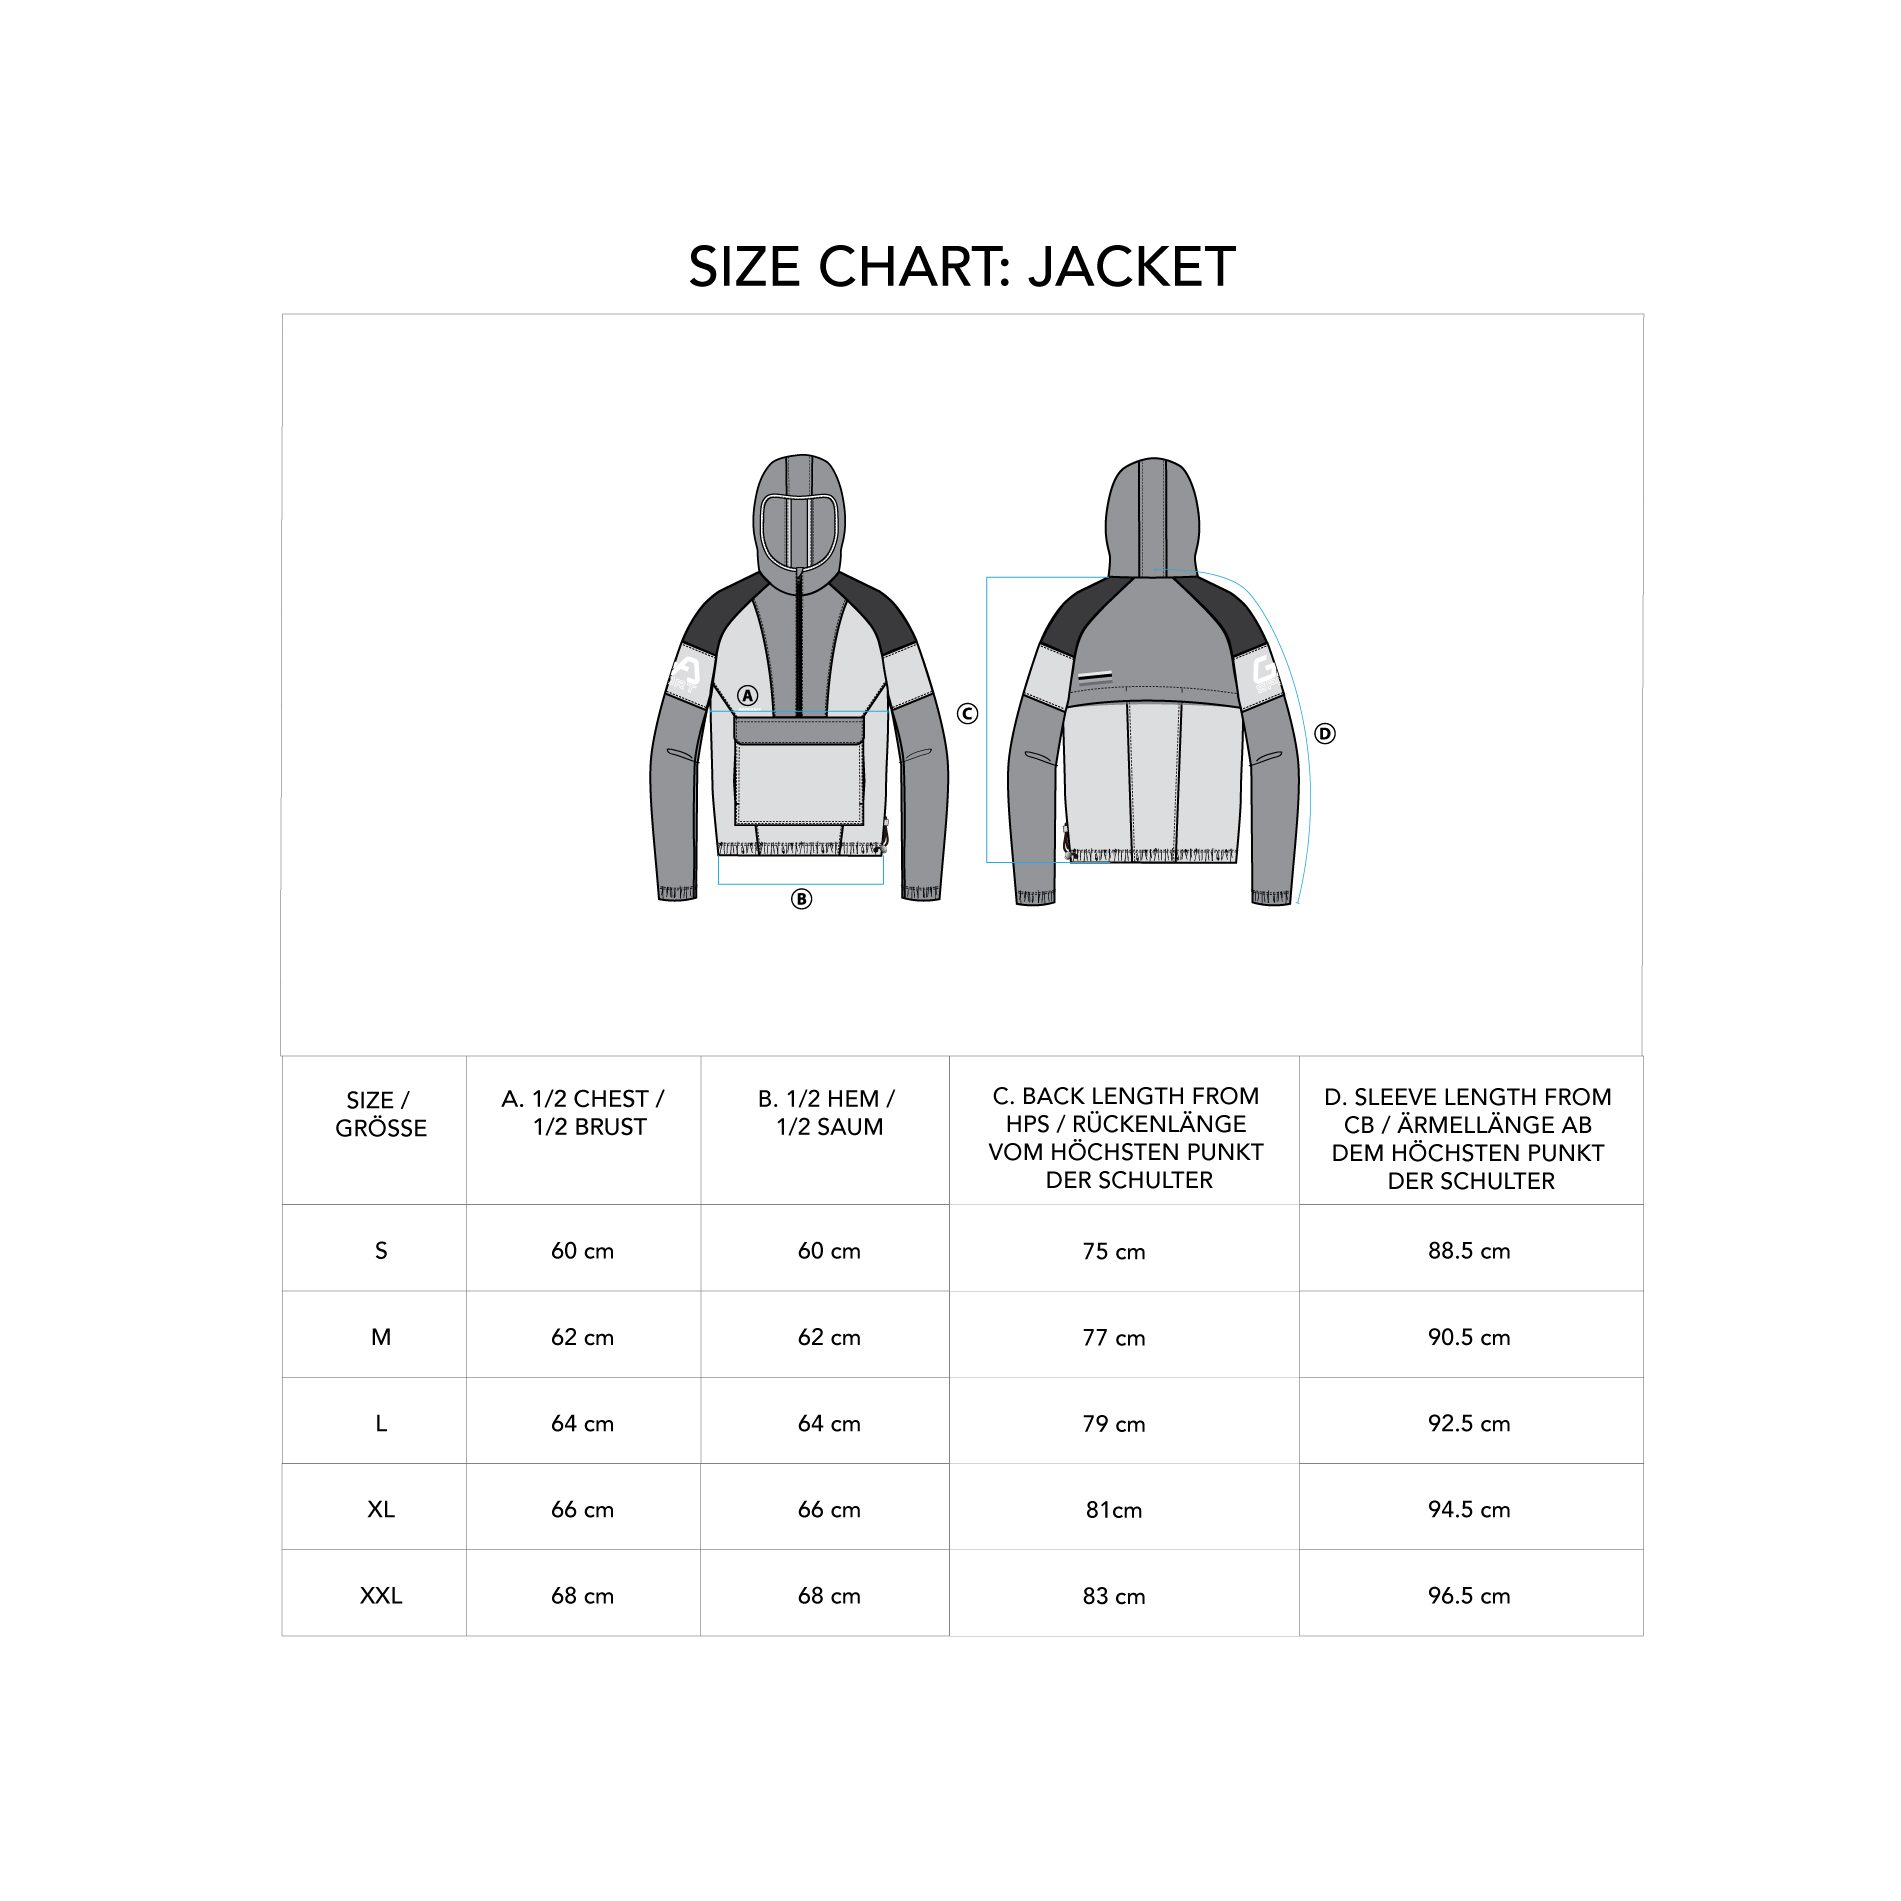 Functional Anorak Water Resistant Jacket for Men - size chart